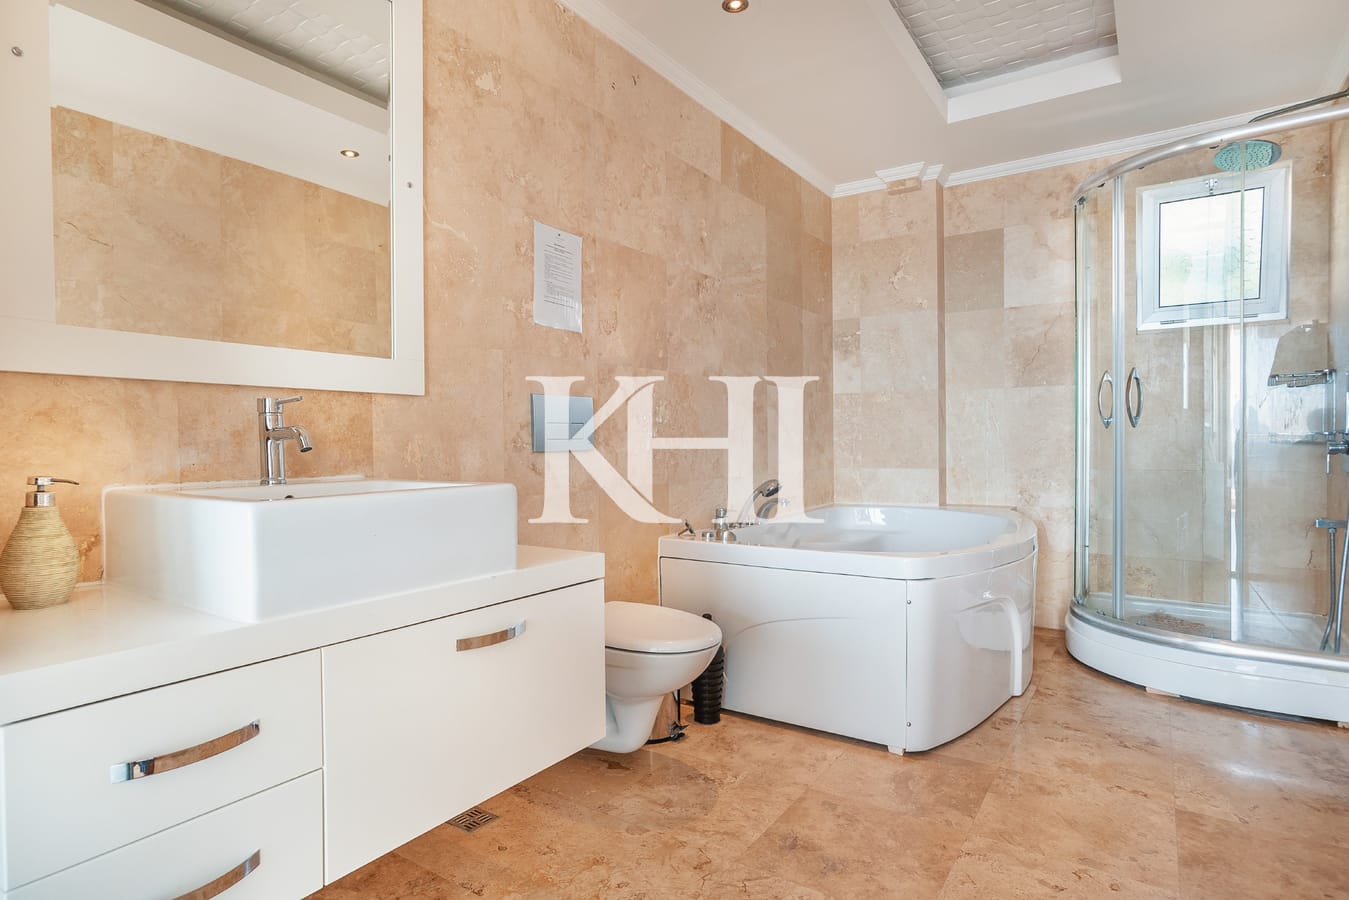 Detached Villa For Sale With Panoramic Kalkan View Slide Image 28